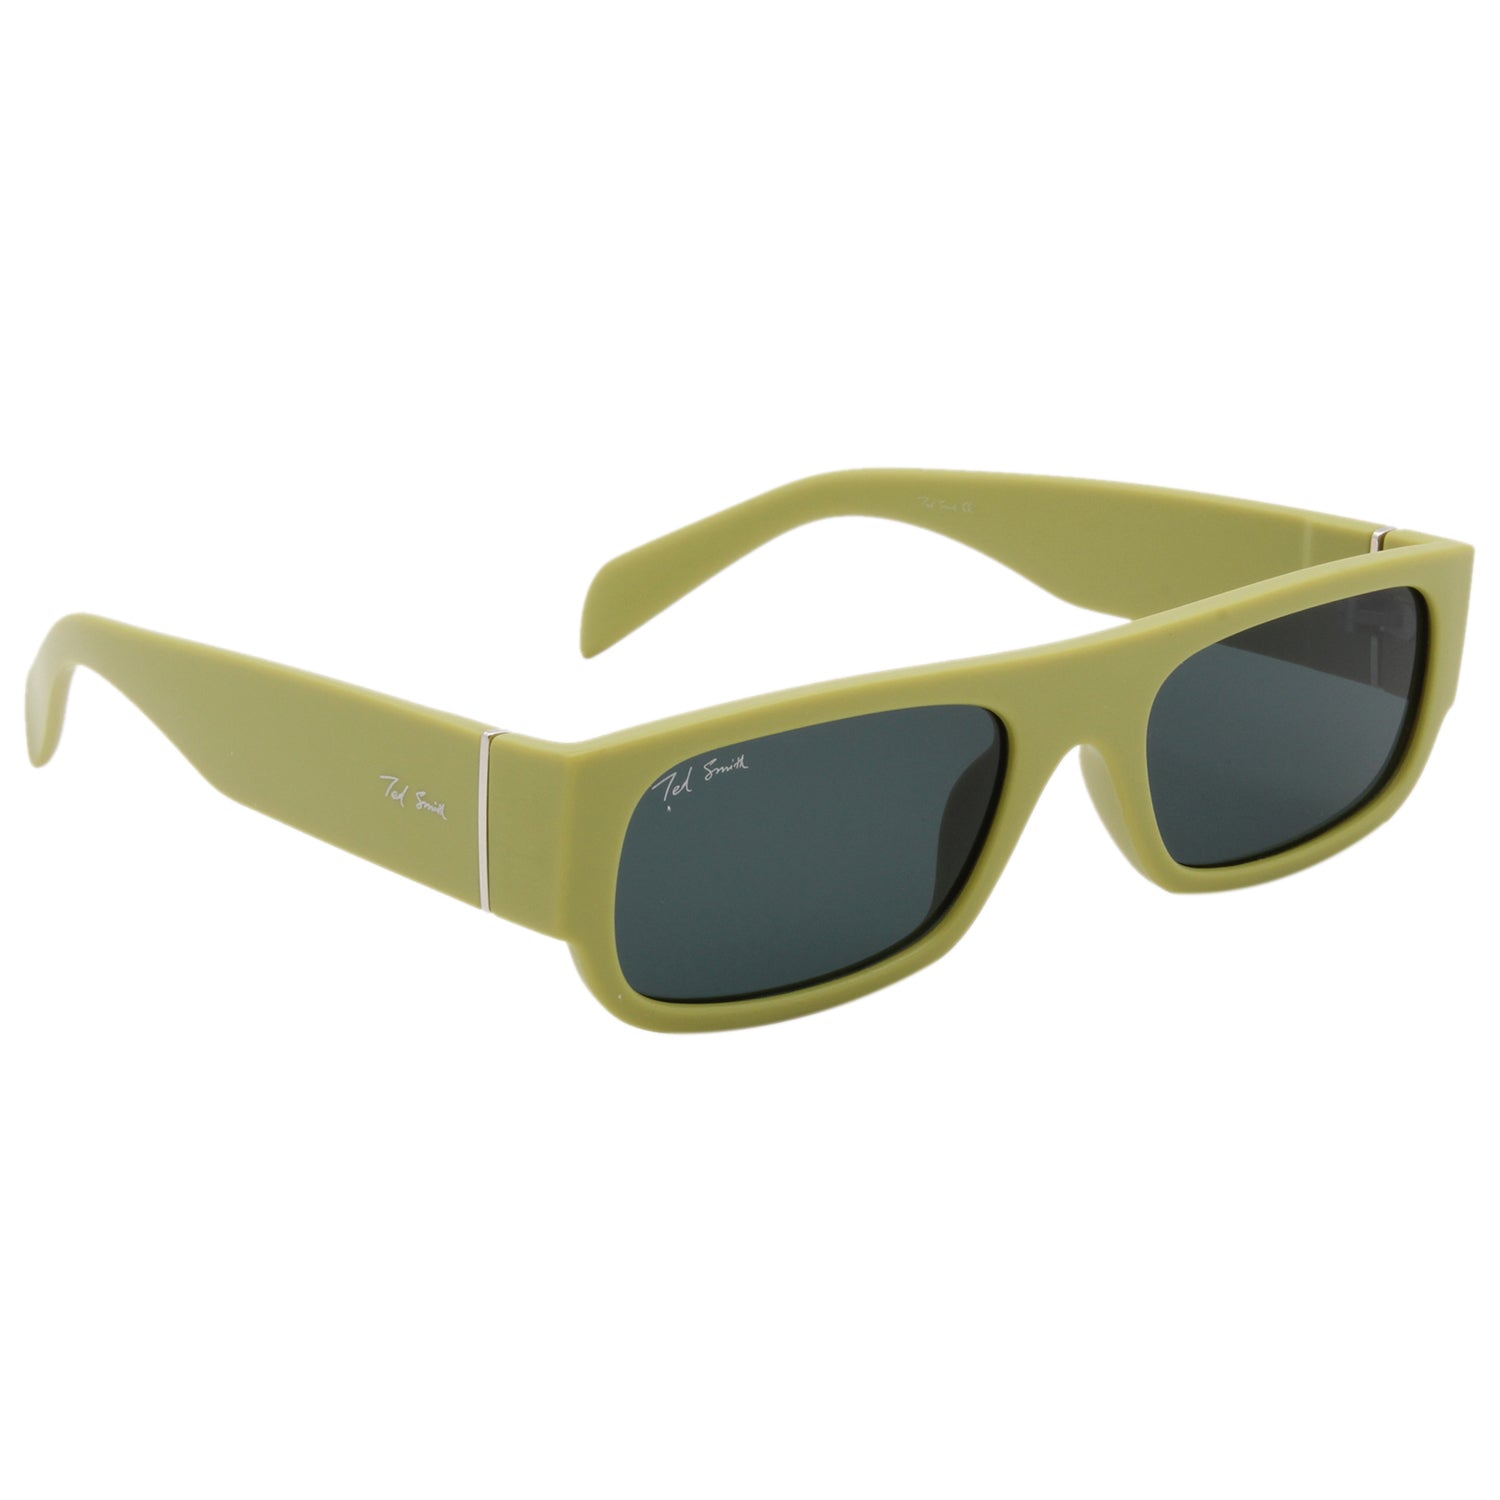 Ted Smith Rectangle Brown Polycarbonate Sunglasses For Men Women